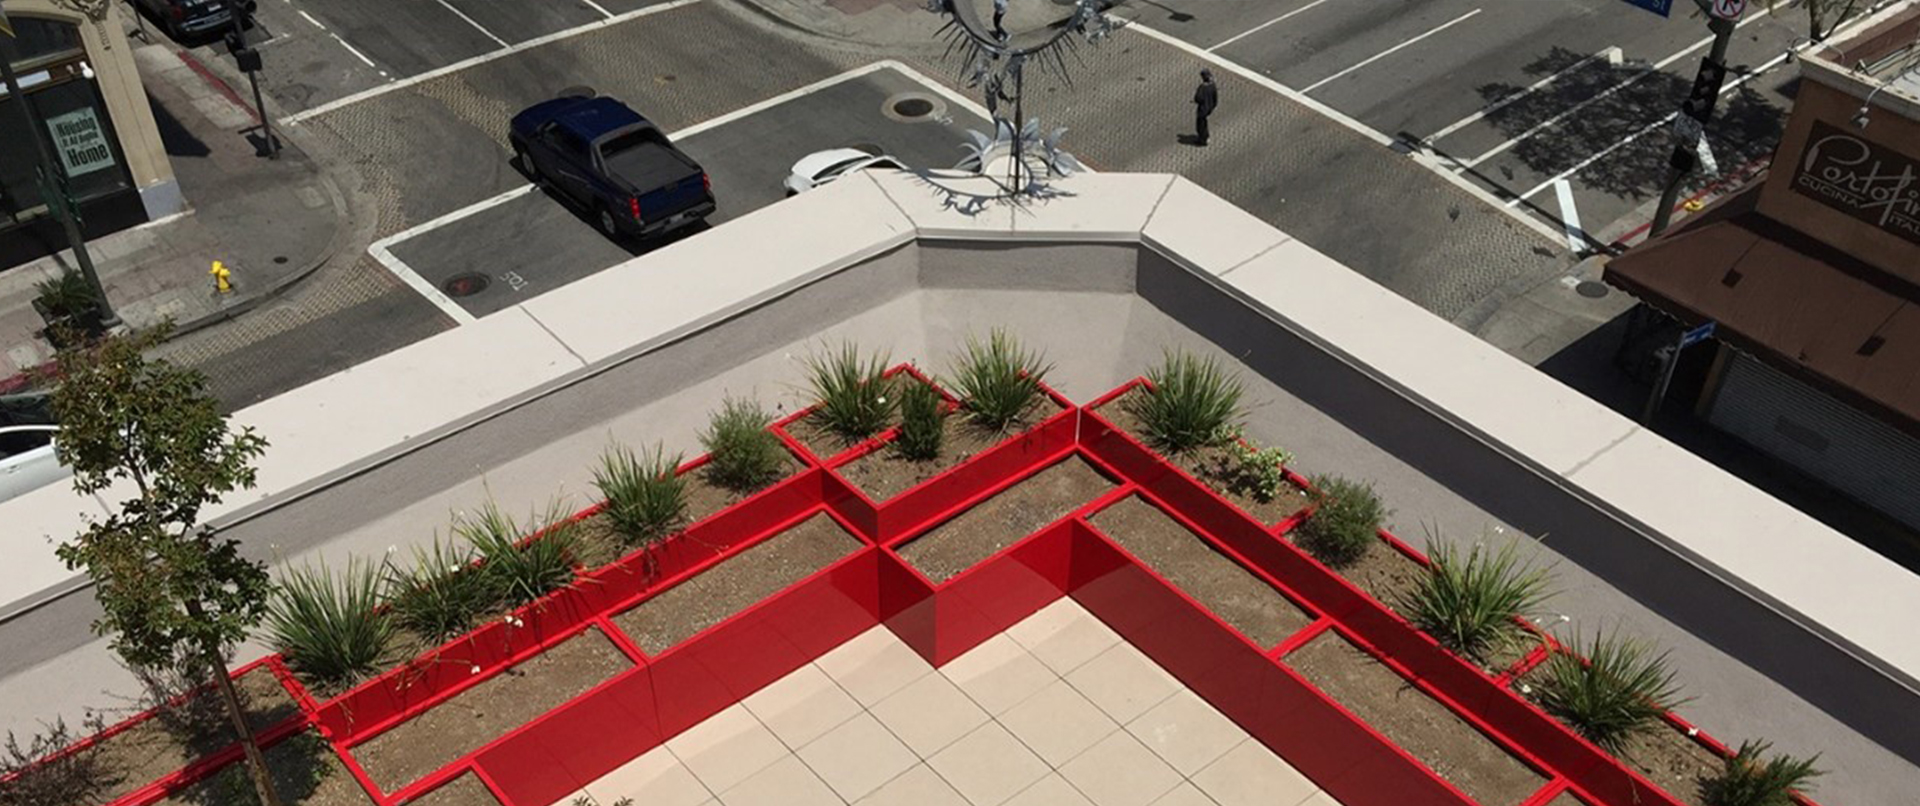 Aerial View Rooftop with Bright Red Aluminum Cube Planters